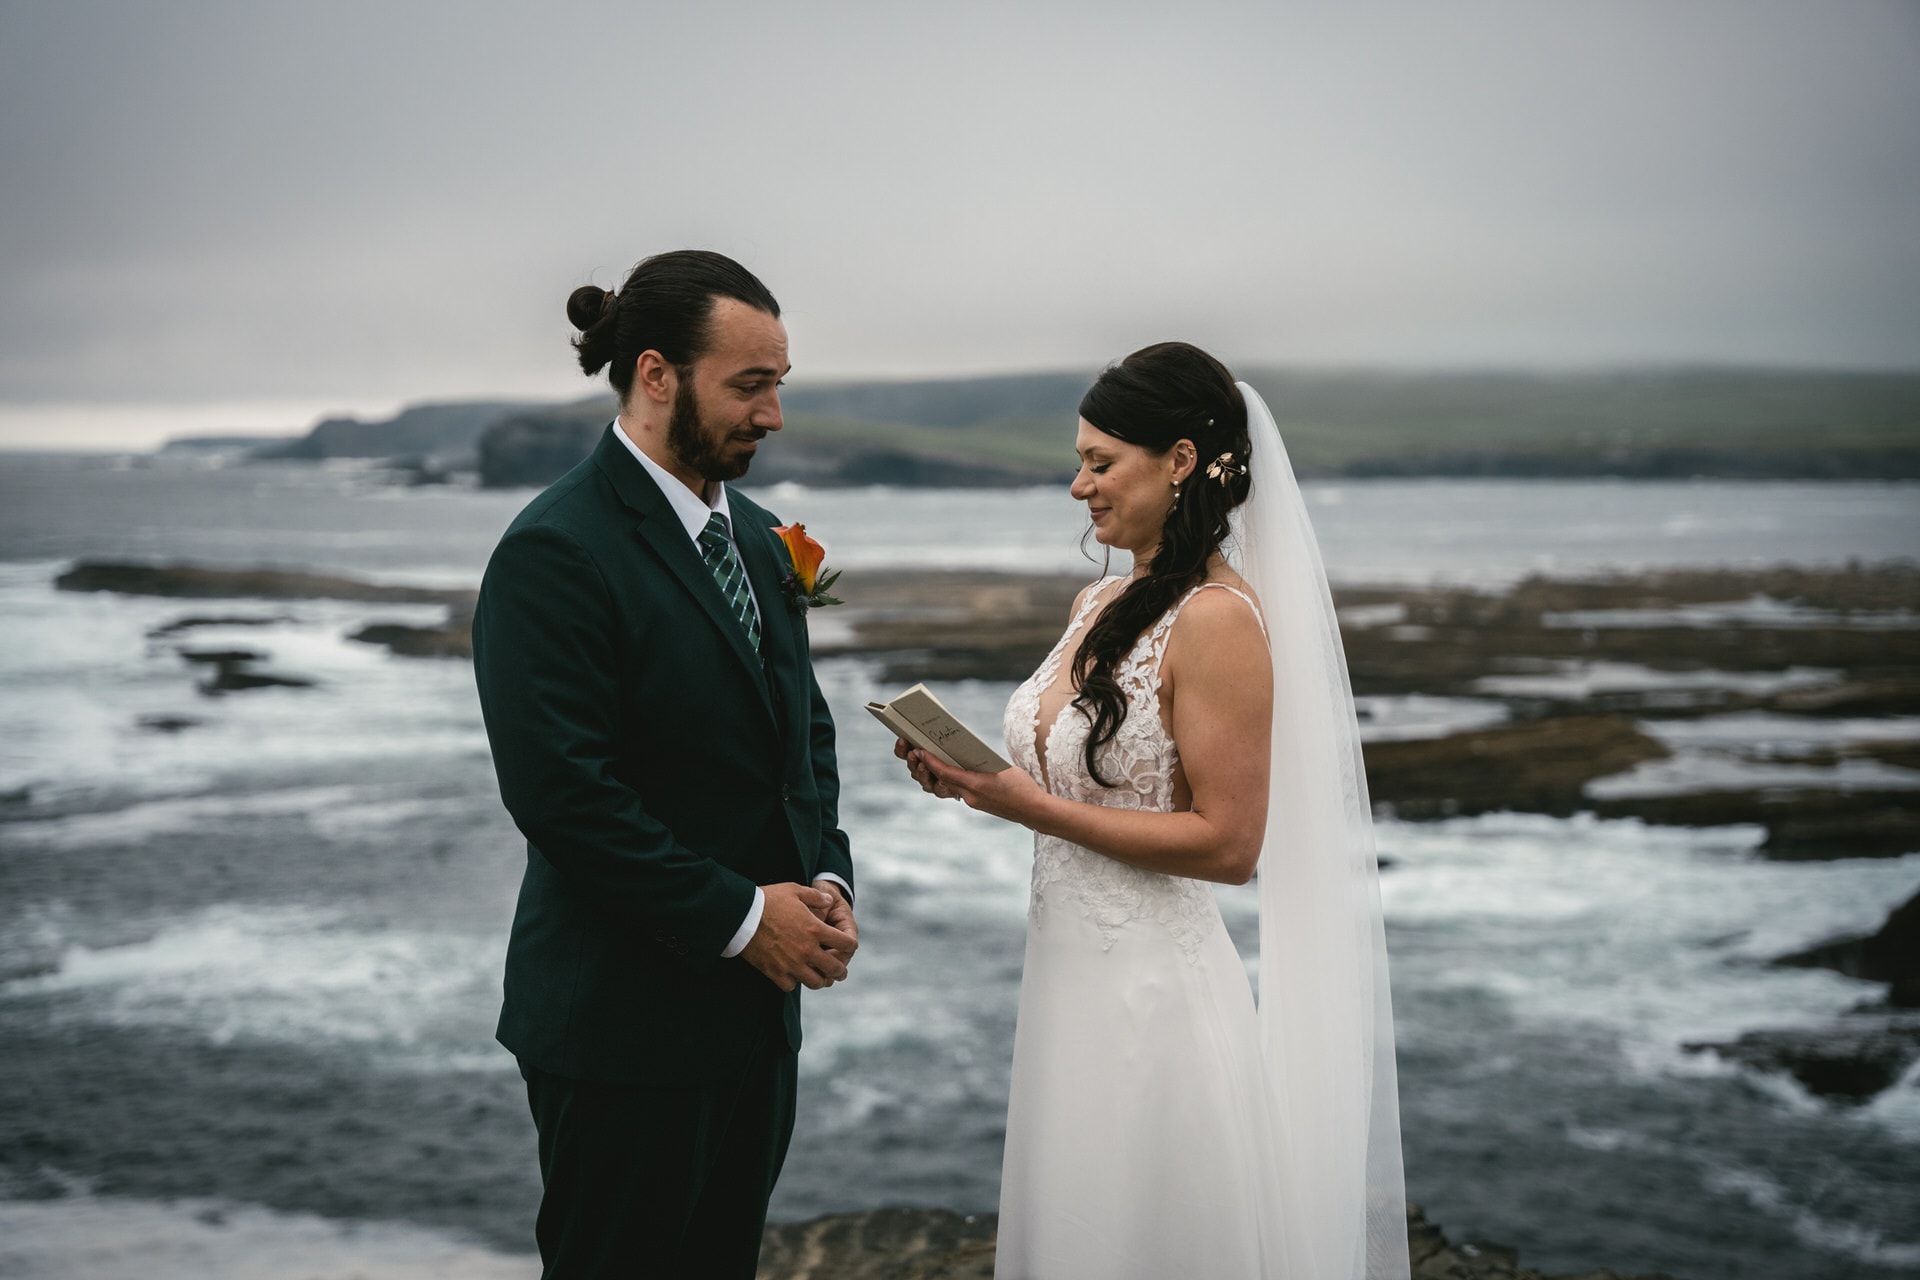 Jesse and Sal's Irish elopement: A day of adventure and love.